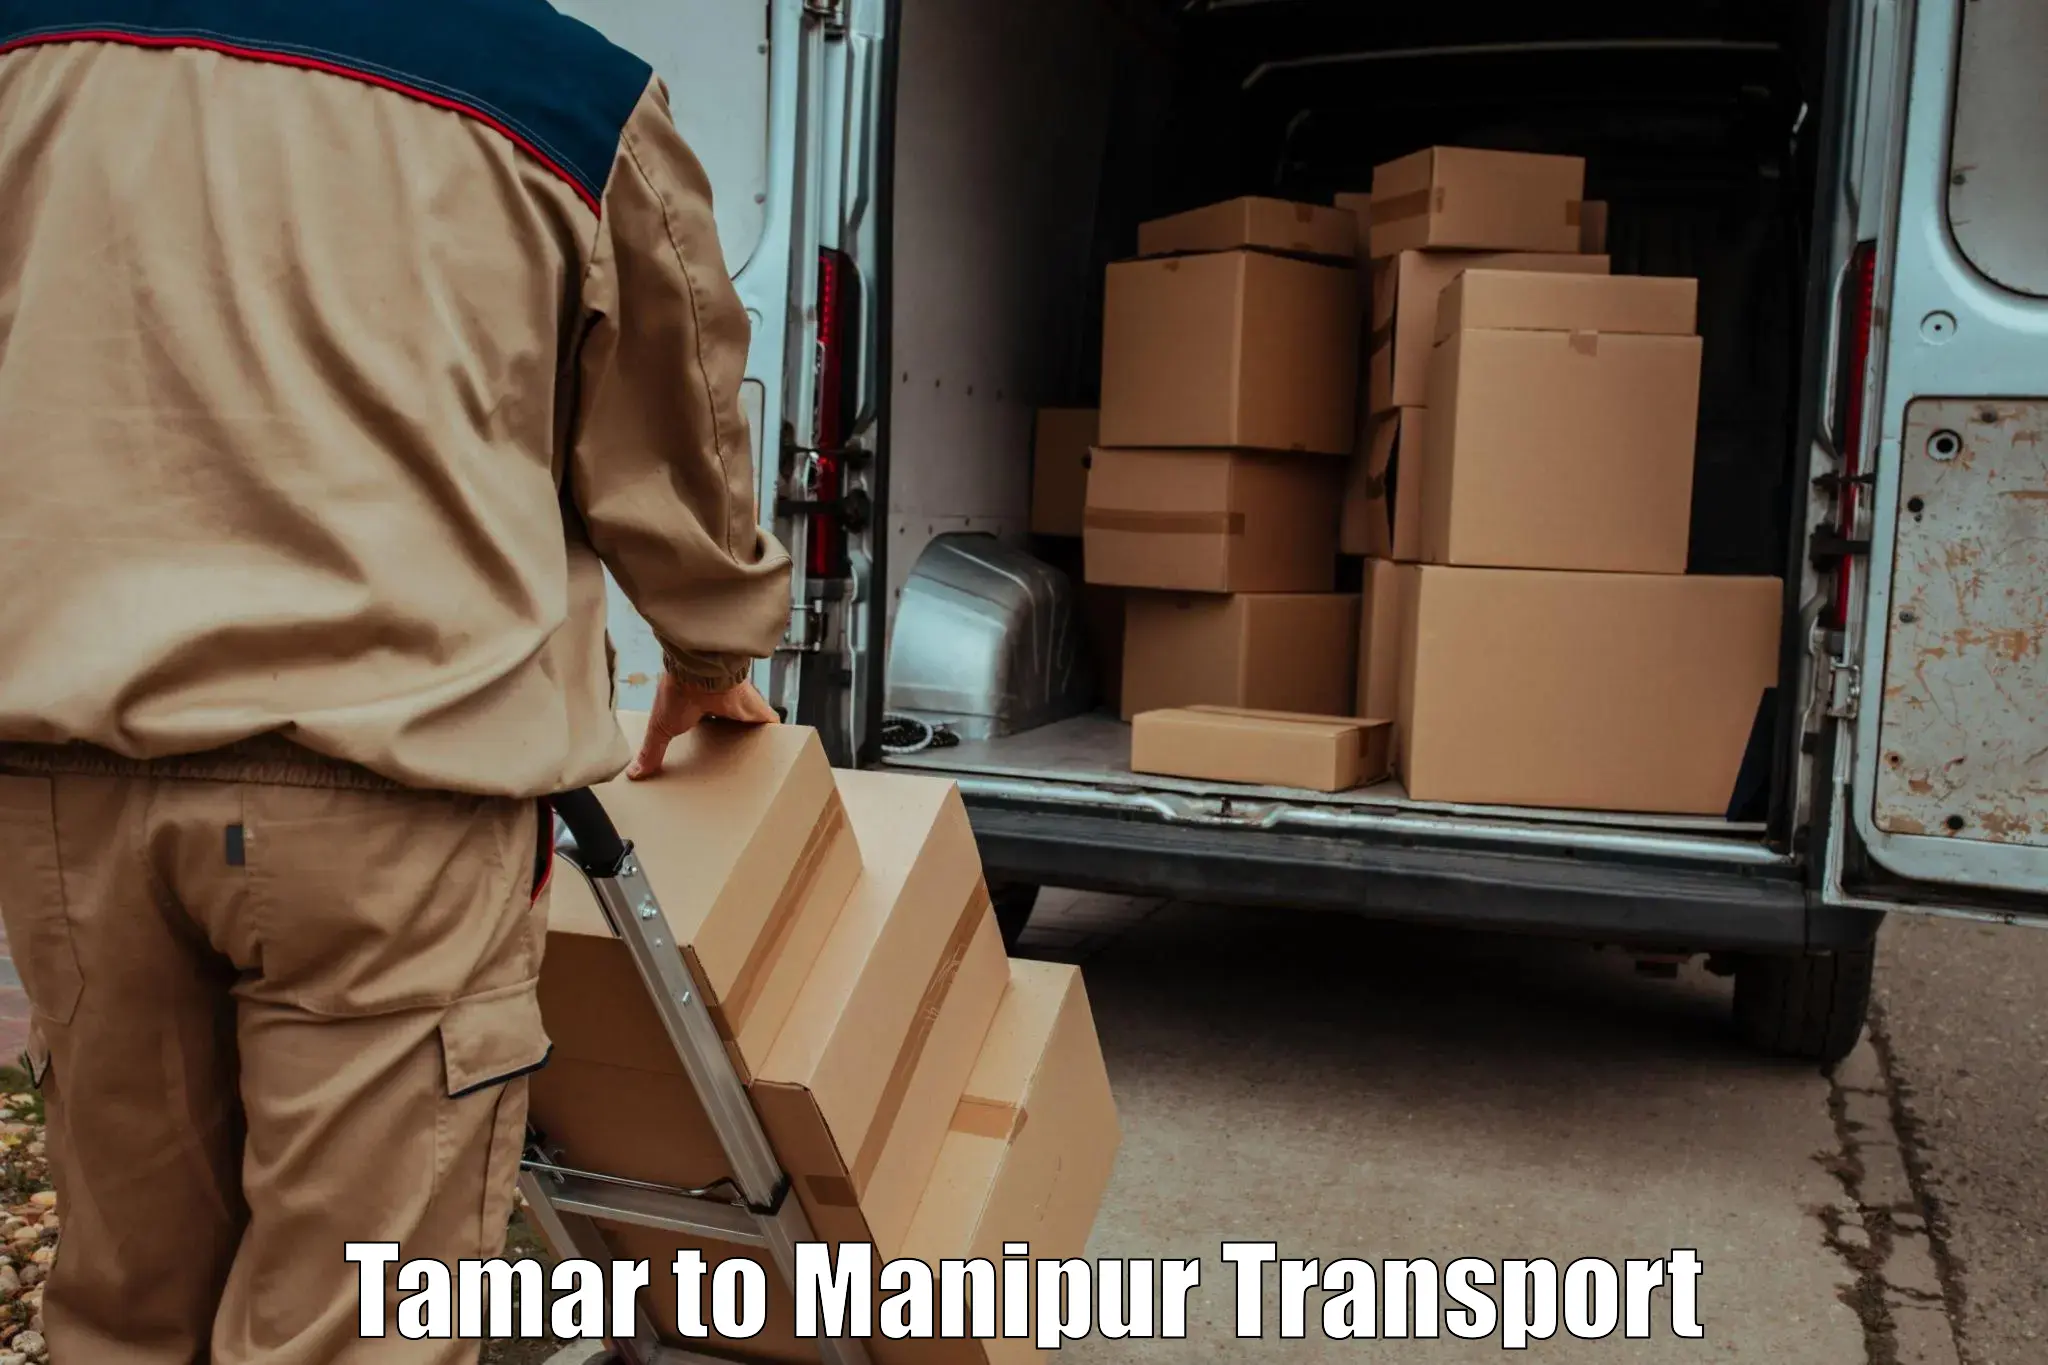 Transport shared services Tamar to Manipur